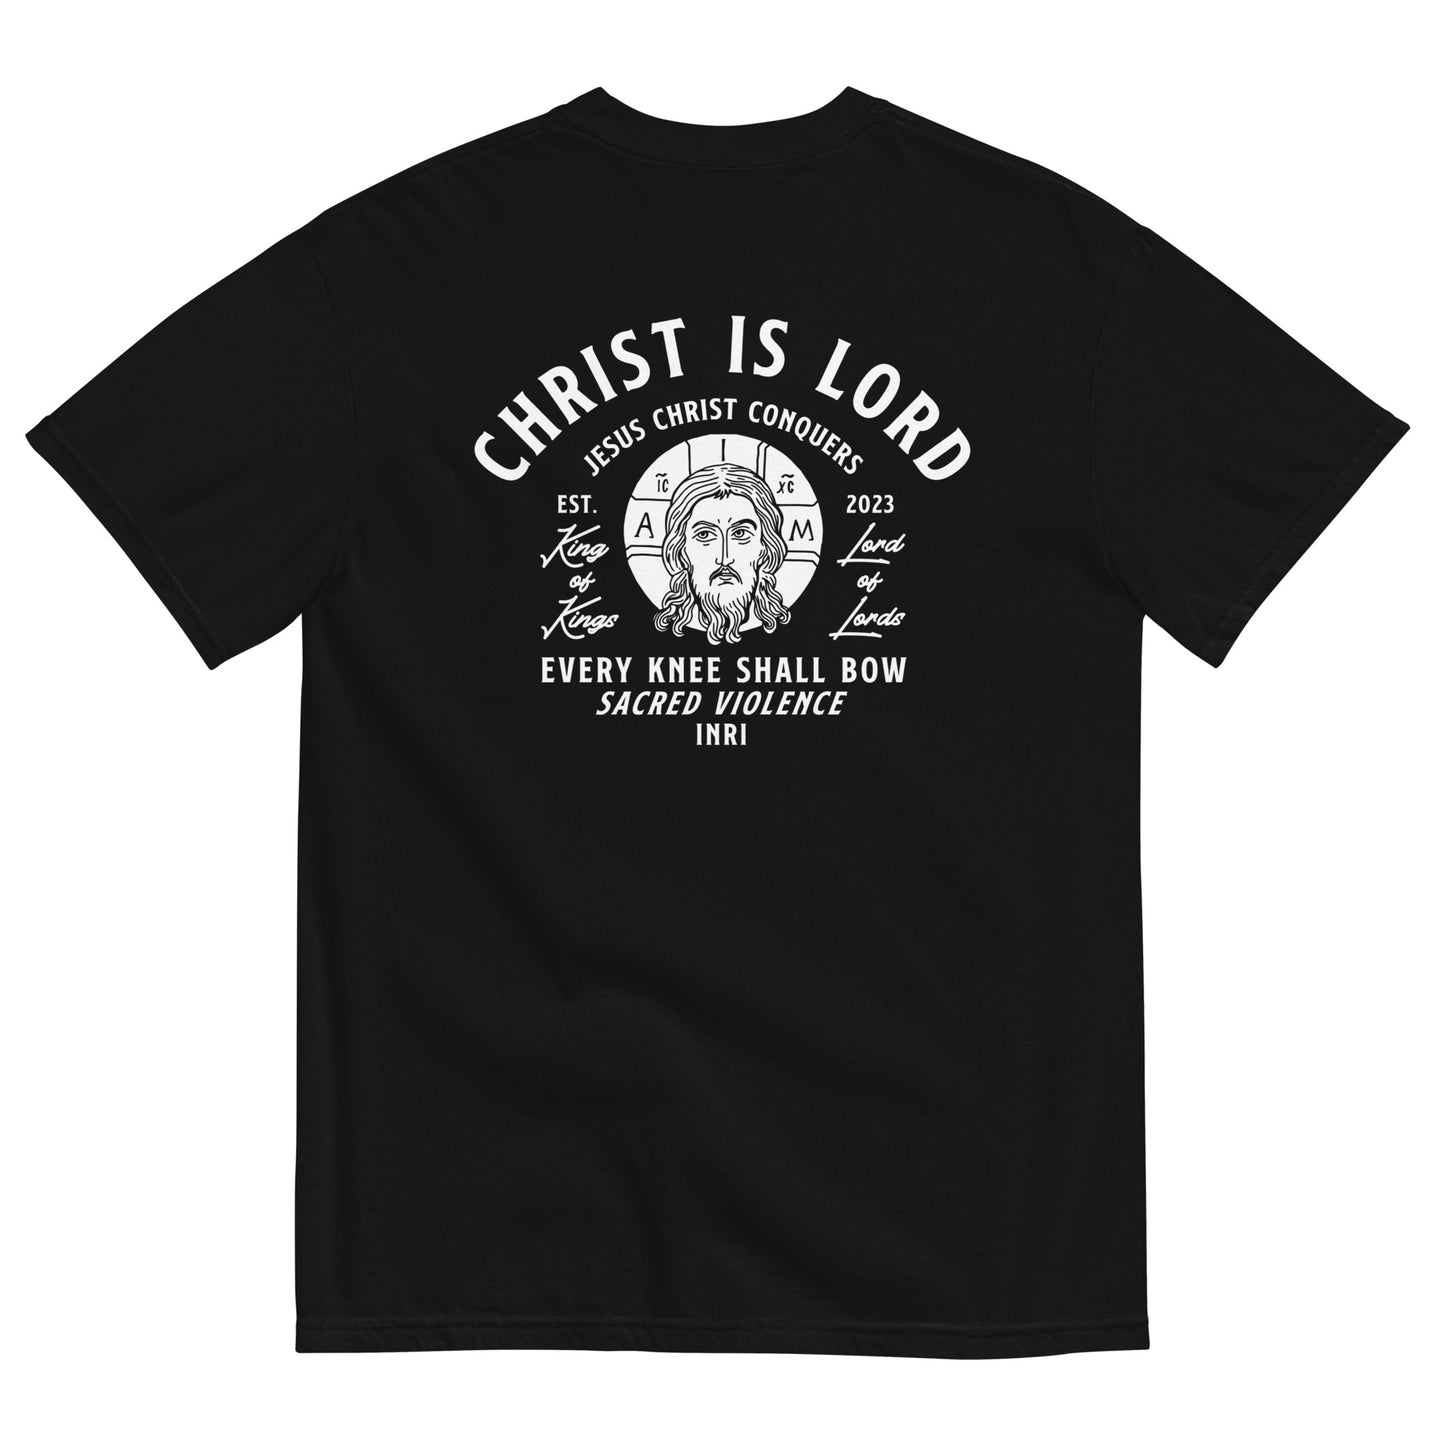 Christ is Lord - Front and Back